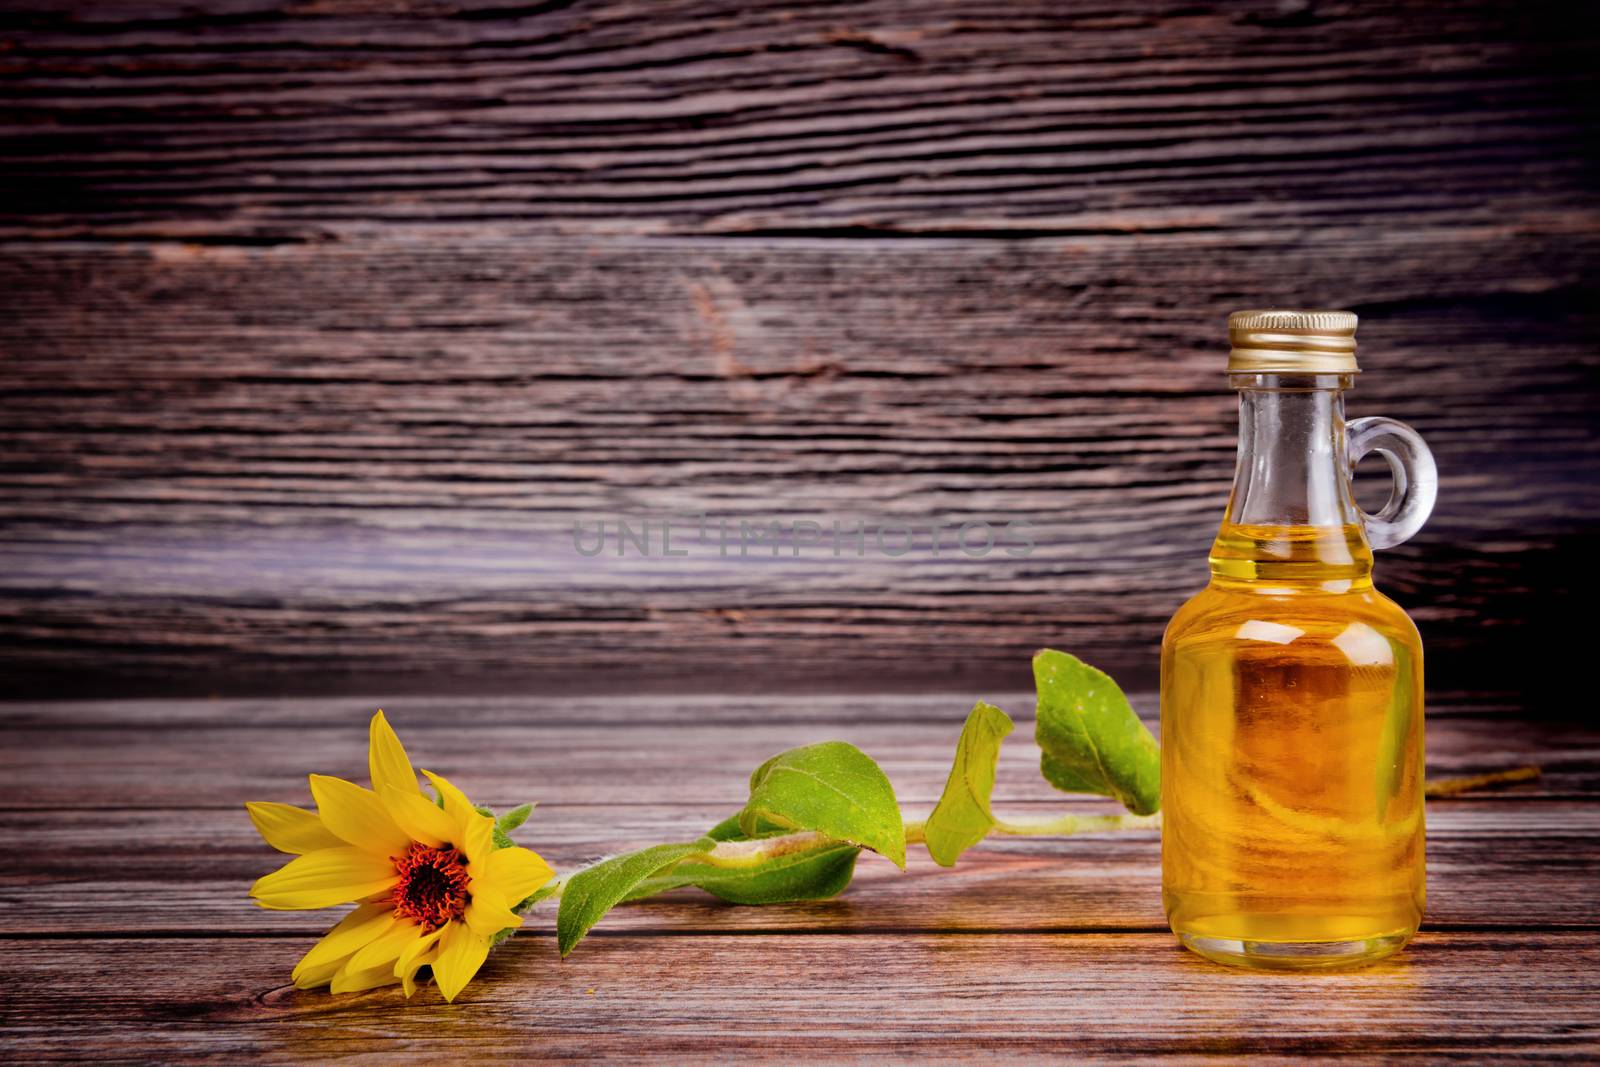 Glass bottle with sunflower oil and sunflower flower on wooden background. Studio shot. by leonik